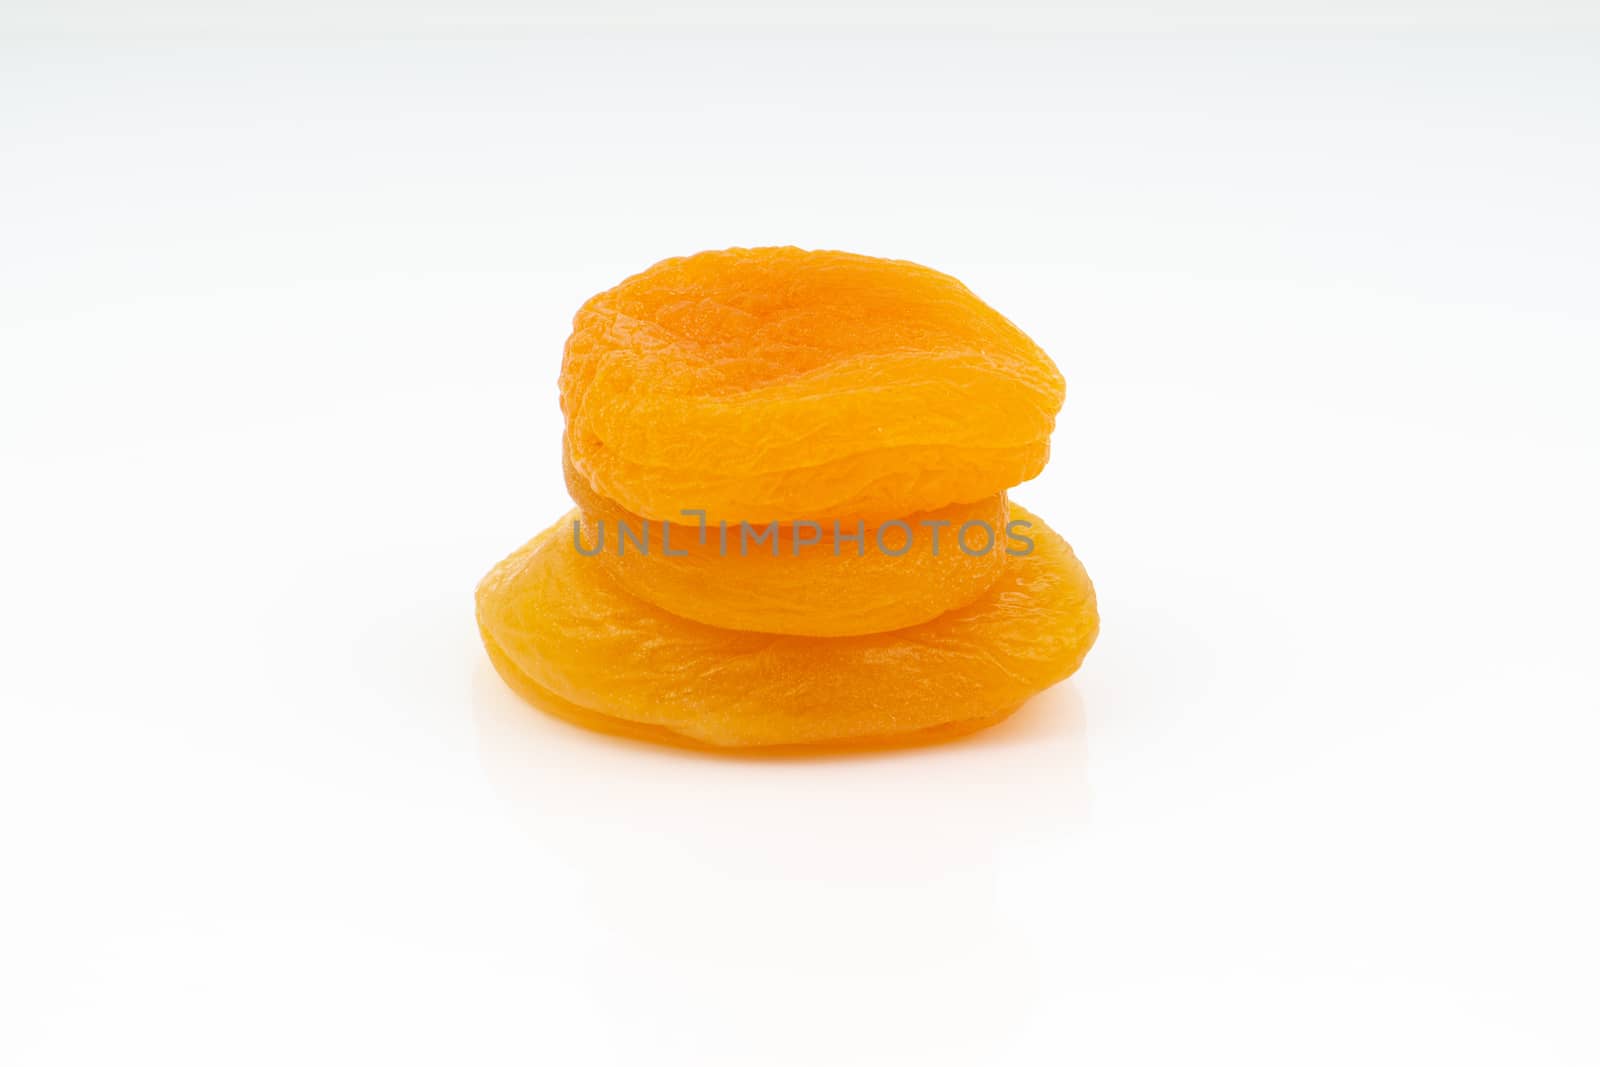 Dried apricot isolated on a white background by silverwings